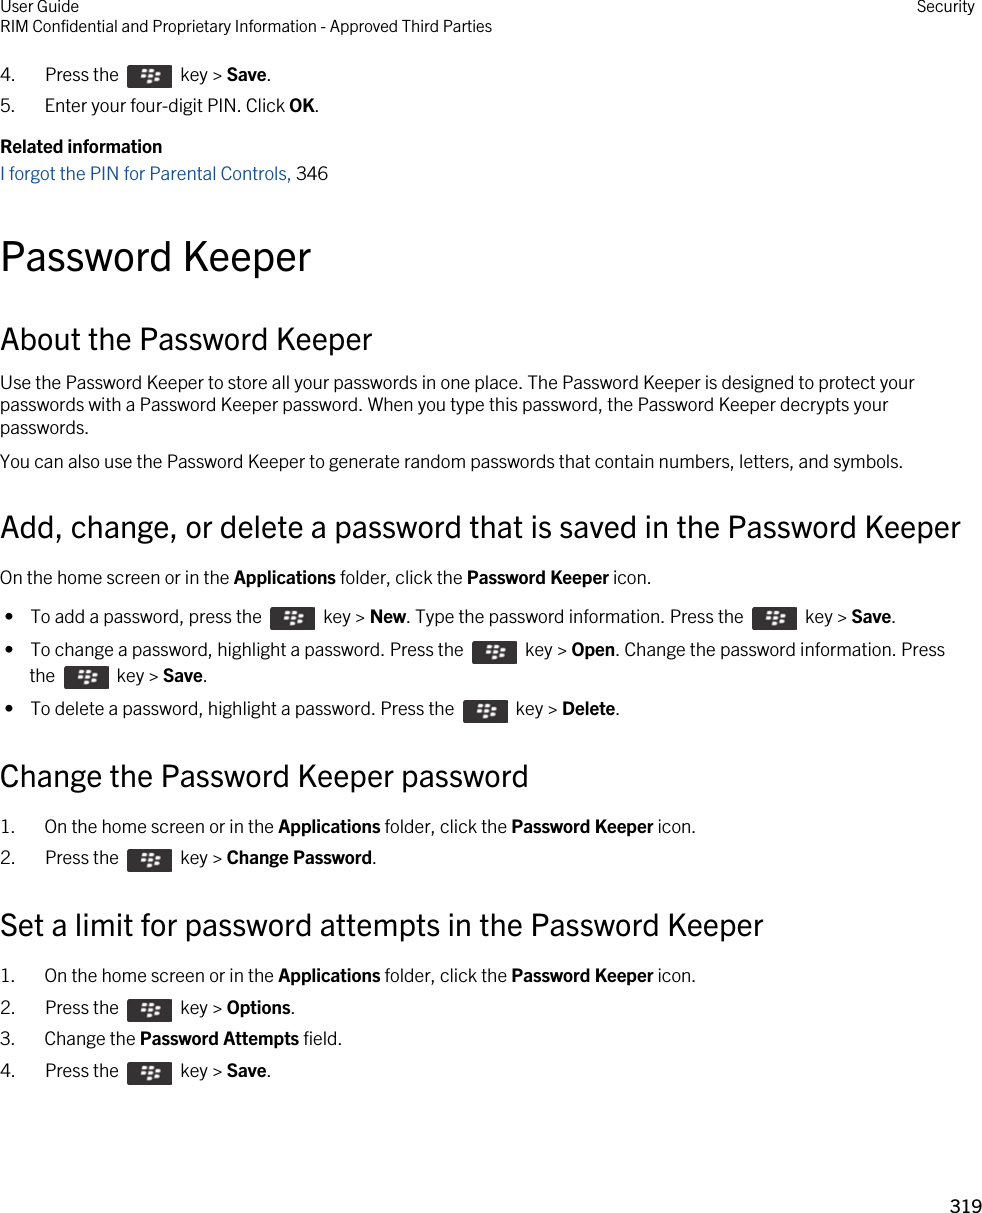 4.  Press the    key &gt; Save. 5. Enter your four-digit PIN. Click OK.Related informationI forgot the PIN for Parental Controls, 346Password KeeperAbout the Password KeeperUse the Password Keeper to store all your passwords in one place. The Password Keeper is designed to protect your passwords with a Password Keeper password. When you type this password, the Password Keeper decrypts your passwords.You can also use the Password Keeper to generate random passwords that contain numbers, letters, and symbols.Add, change, or delete a password that is saved in the Password KeeperOn the home screen or in the Applications folder, click the Password Keeper icon. •  To add a password, press the    key &gt; New. Type the password information. Press the    key &gt; Save. •  To change a password, highlight a password. Press the    key &gt; Open. Change the password information. Press the    key &gt; Save. •  To delete a password, highlight a password. Press the    key &gt; Delete.Change the Password Keeper password1. On the home screen or in the Applications folder, click the Password Keeper icon.2.  Press the    key &gt; Change Password. Set a limit for password attempts in the Password Keeper1. On the home screen or in the Applications folder, click the Password Keeper icon.2.  Press the    key &gt; Options. 3. Change the Password Attempts field.4.  Press the    key &gt; Save. User GuideRIM Confidential and Proprietary Information - Approved Third Parties Security319 